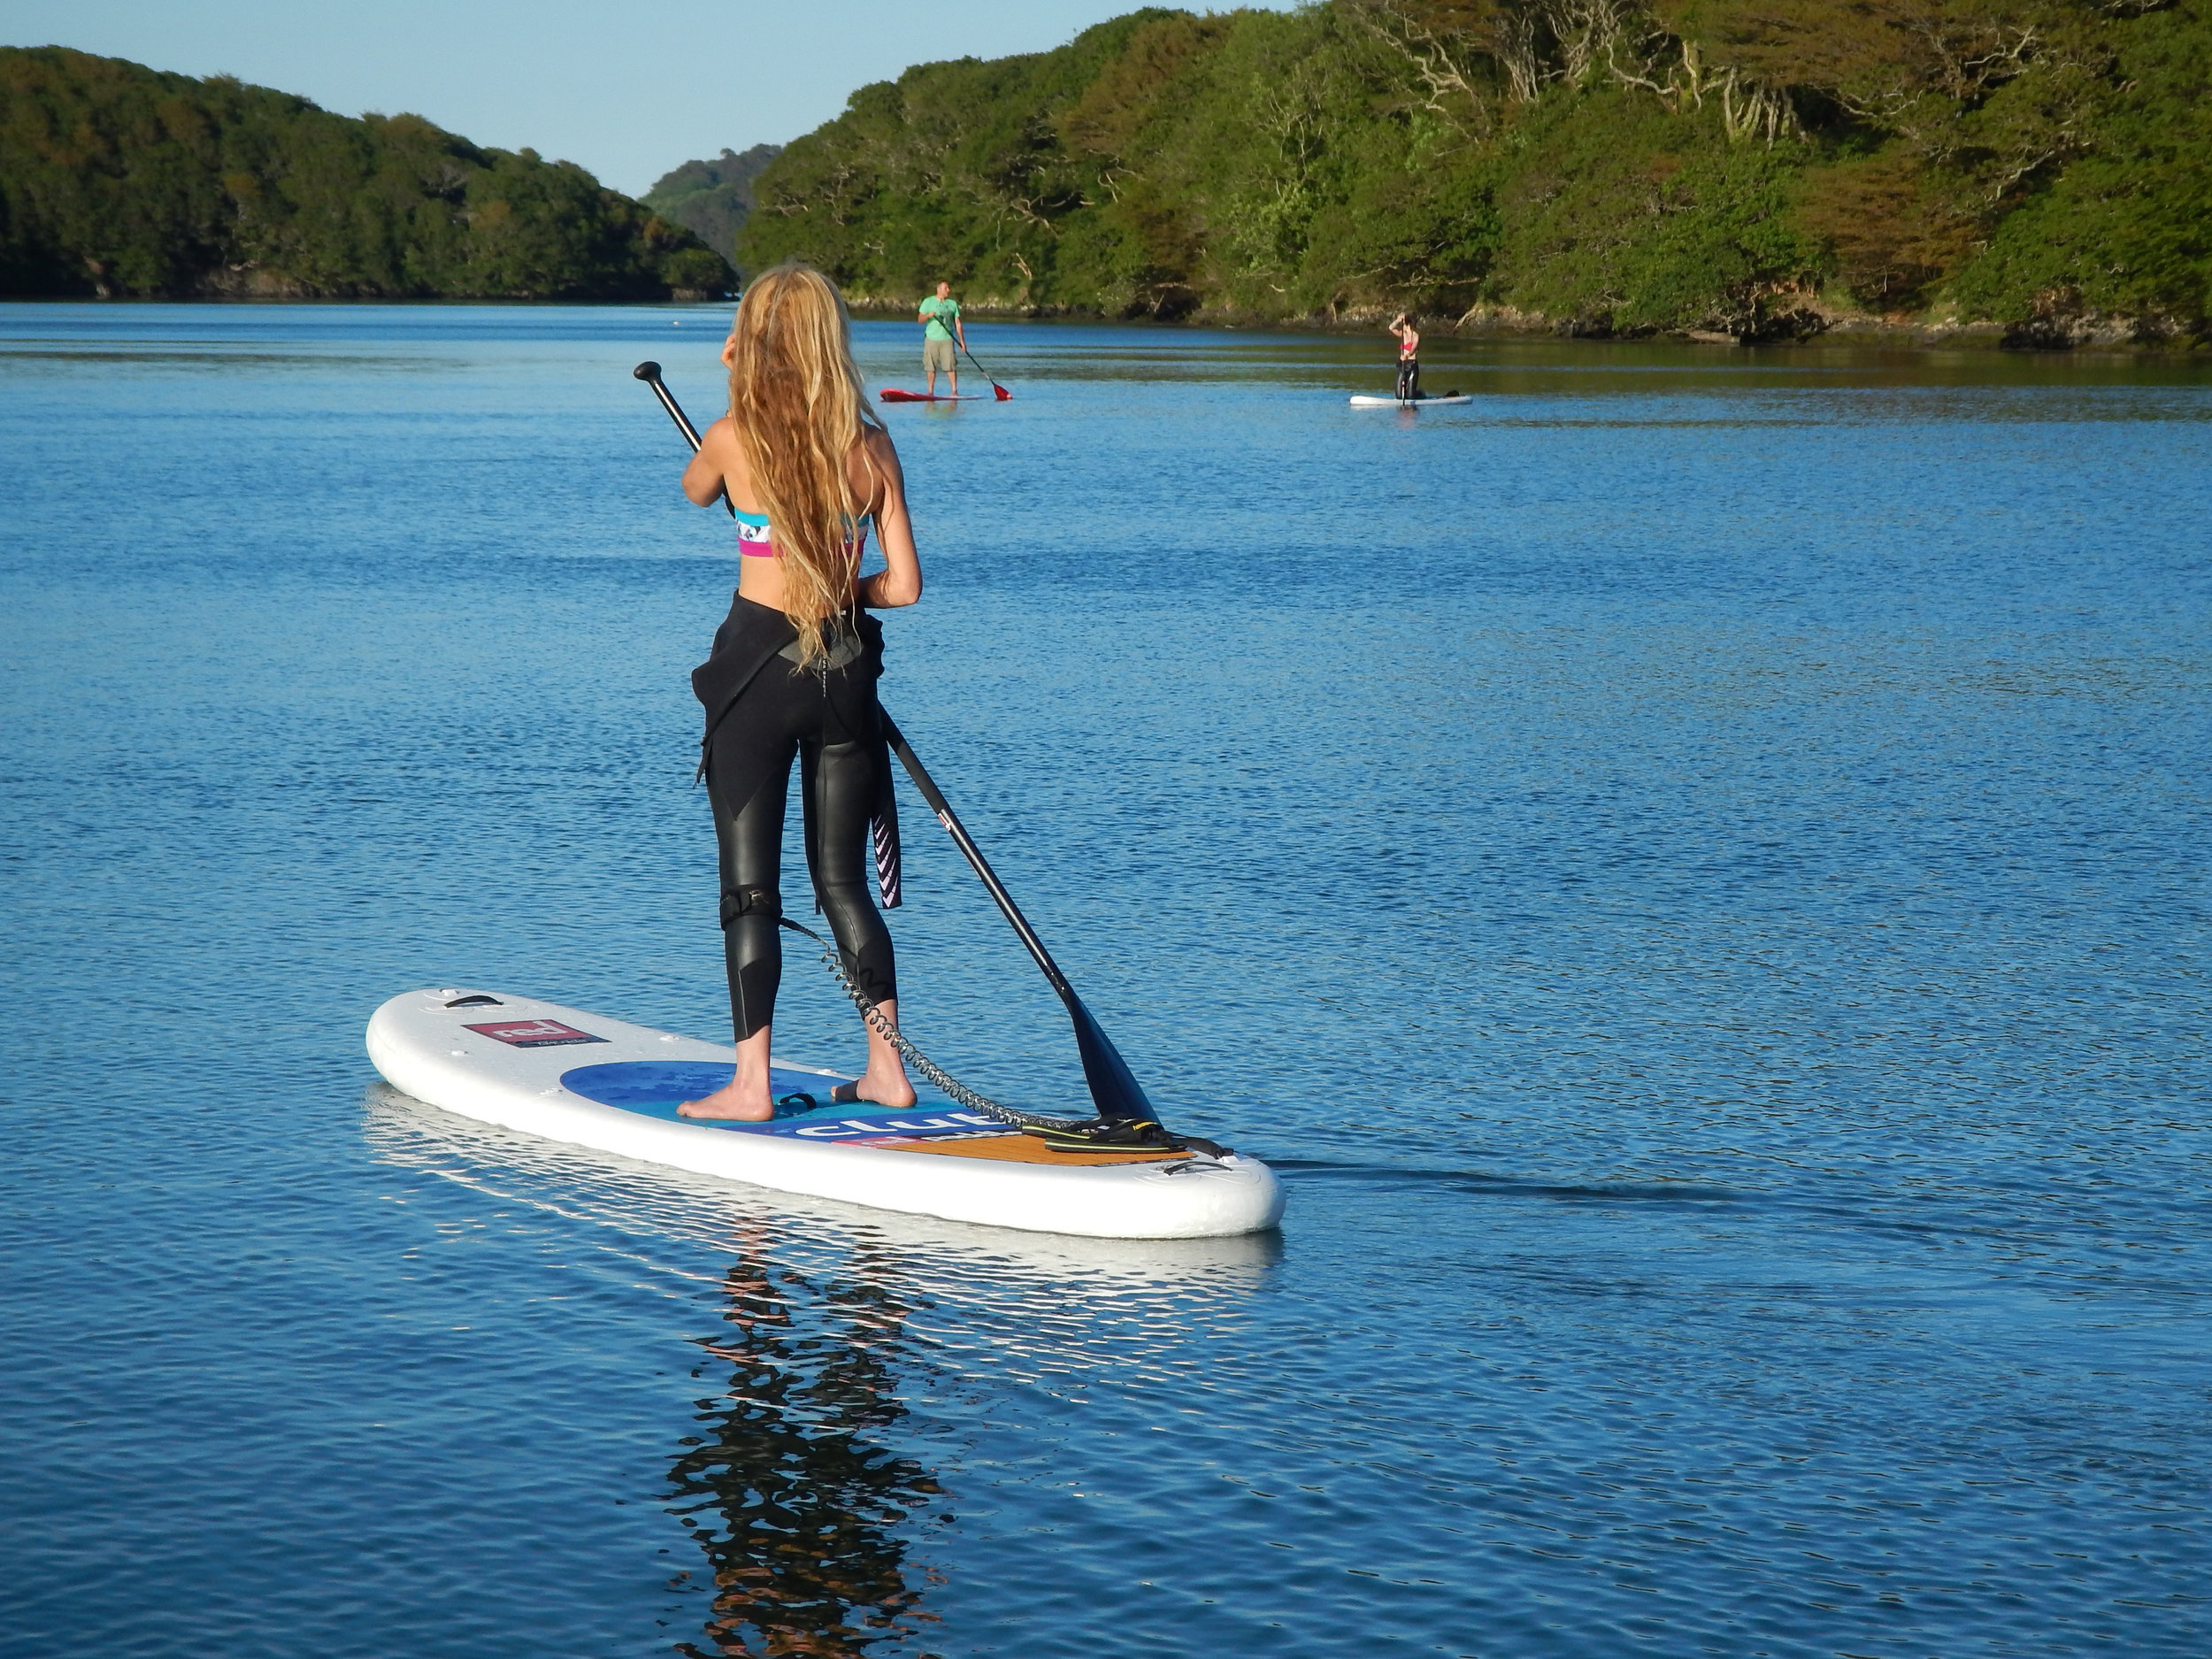 Ocean high paddleboarding, Water adventure, Stand up paddleboarding, Nature exploration, 2500x1880 HD Desktop